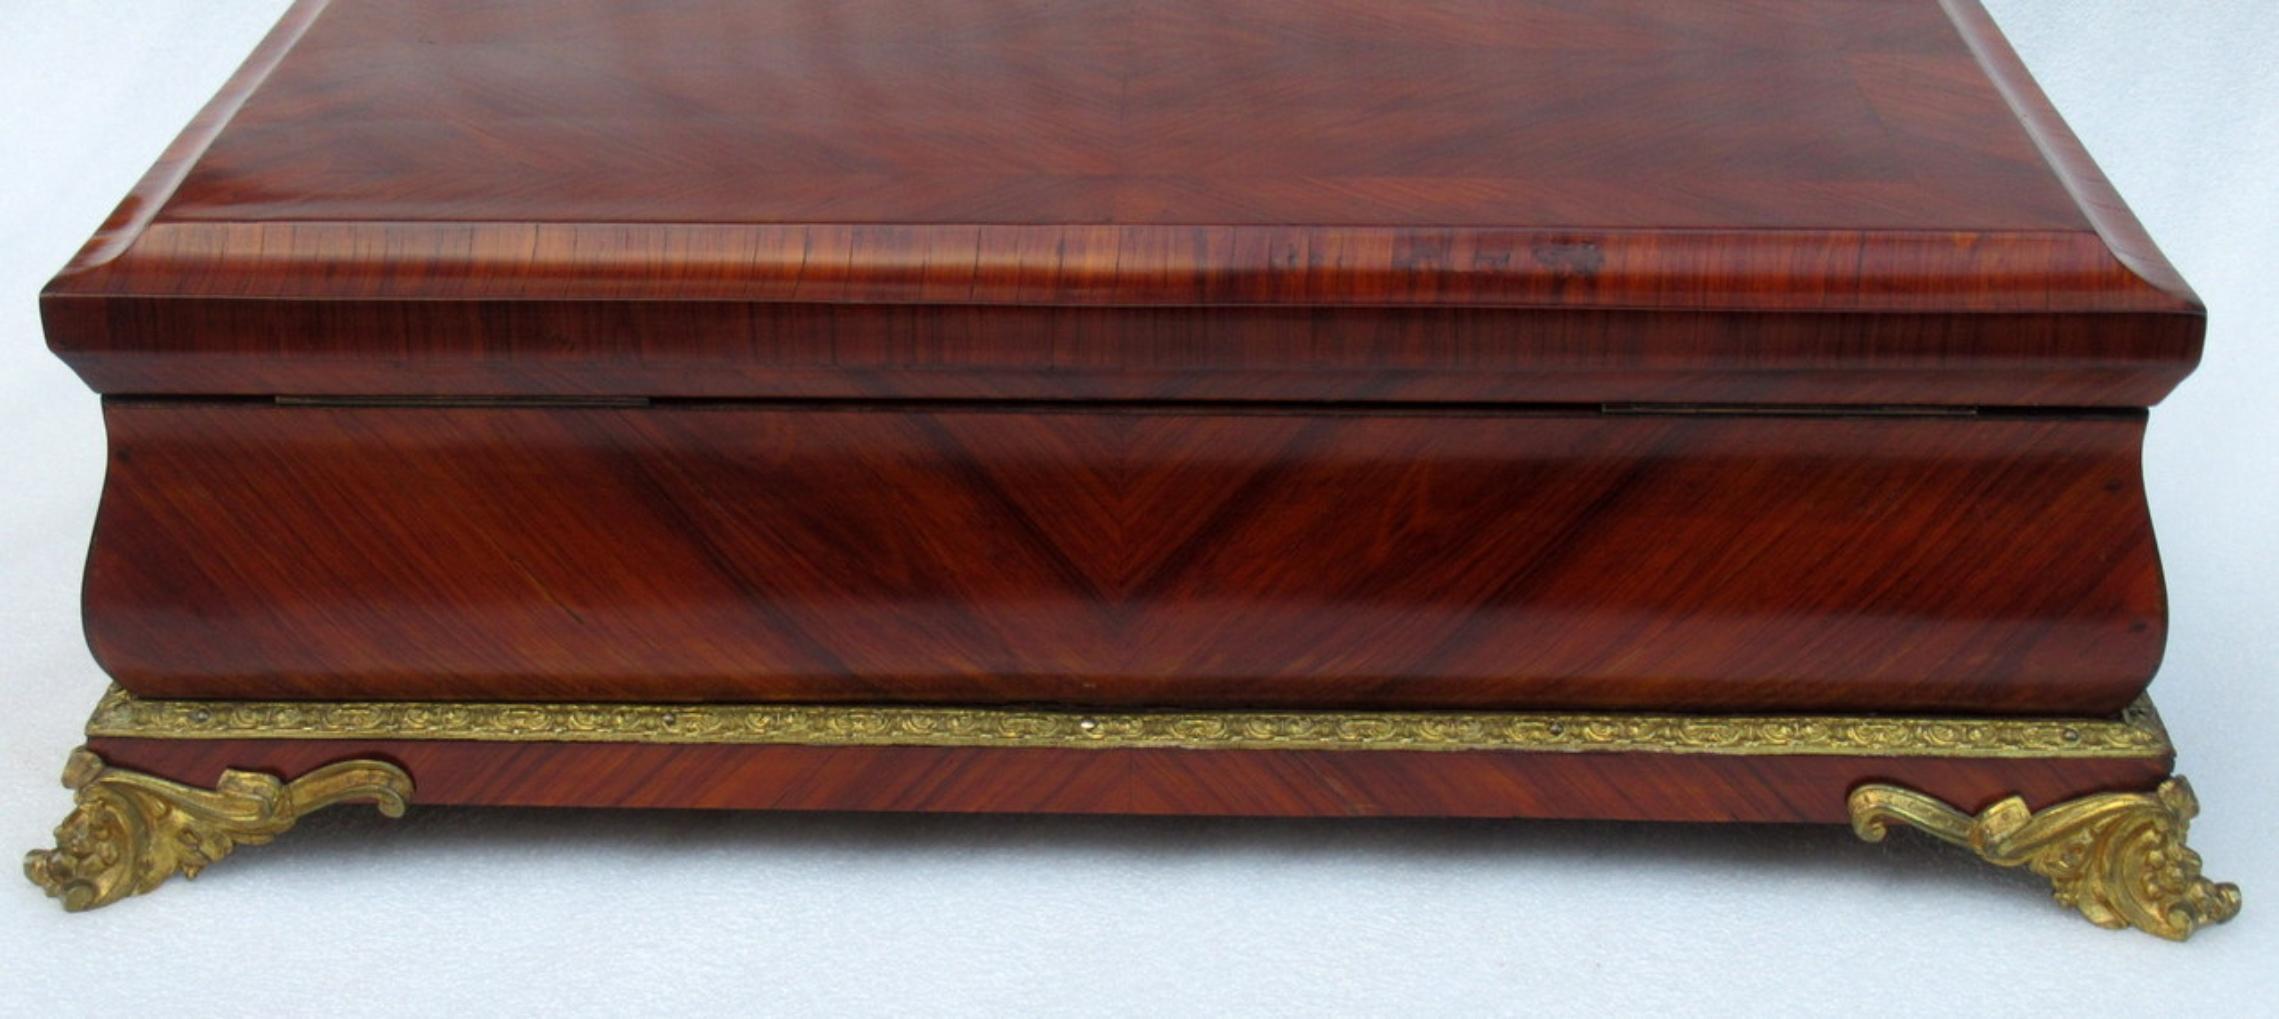 Antique French Kingwood Bird's-Eye Maple Jewelry Casket Box Tahan Paris In Good Condition For Sale In Dublin, Ireland